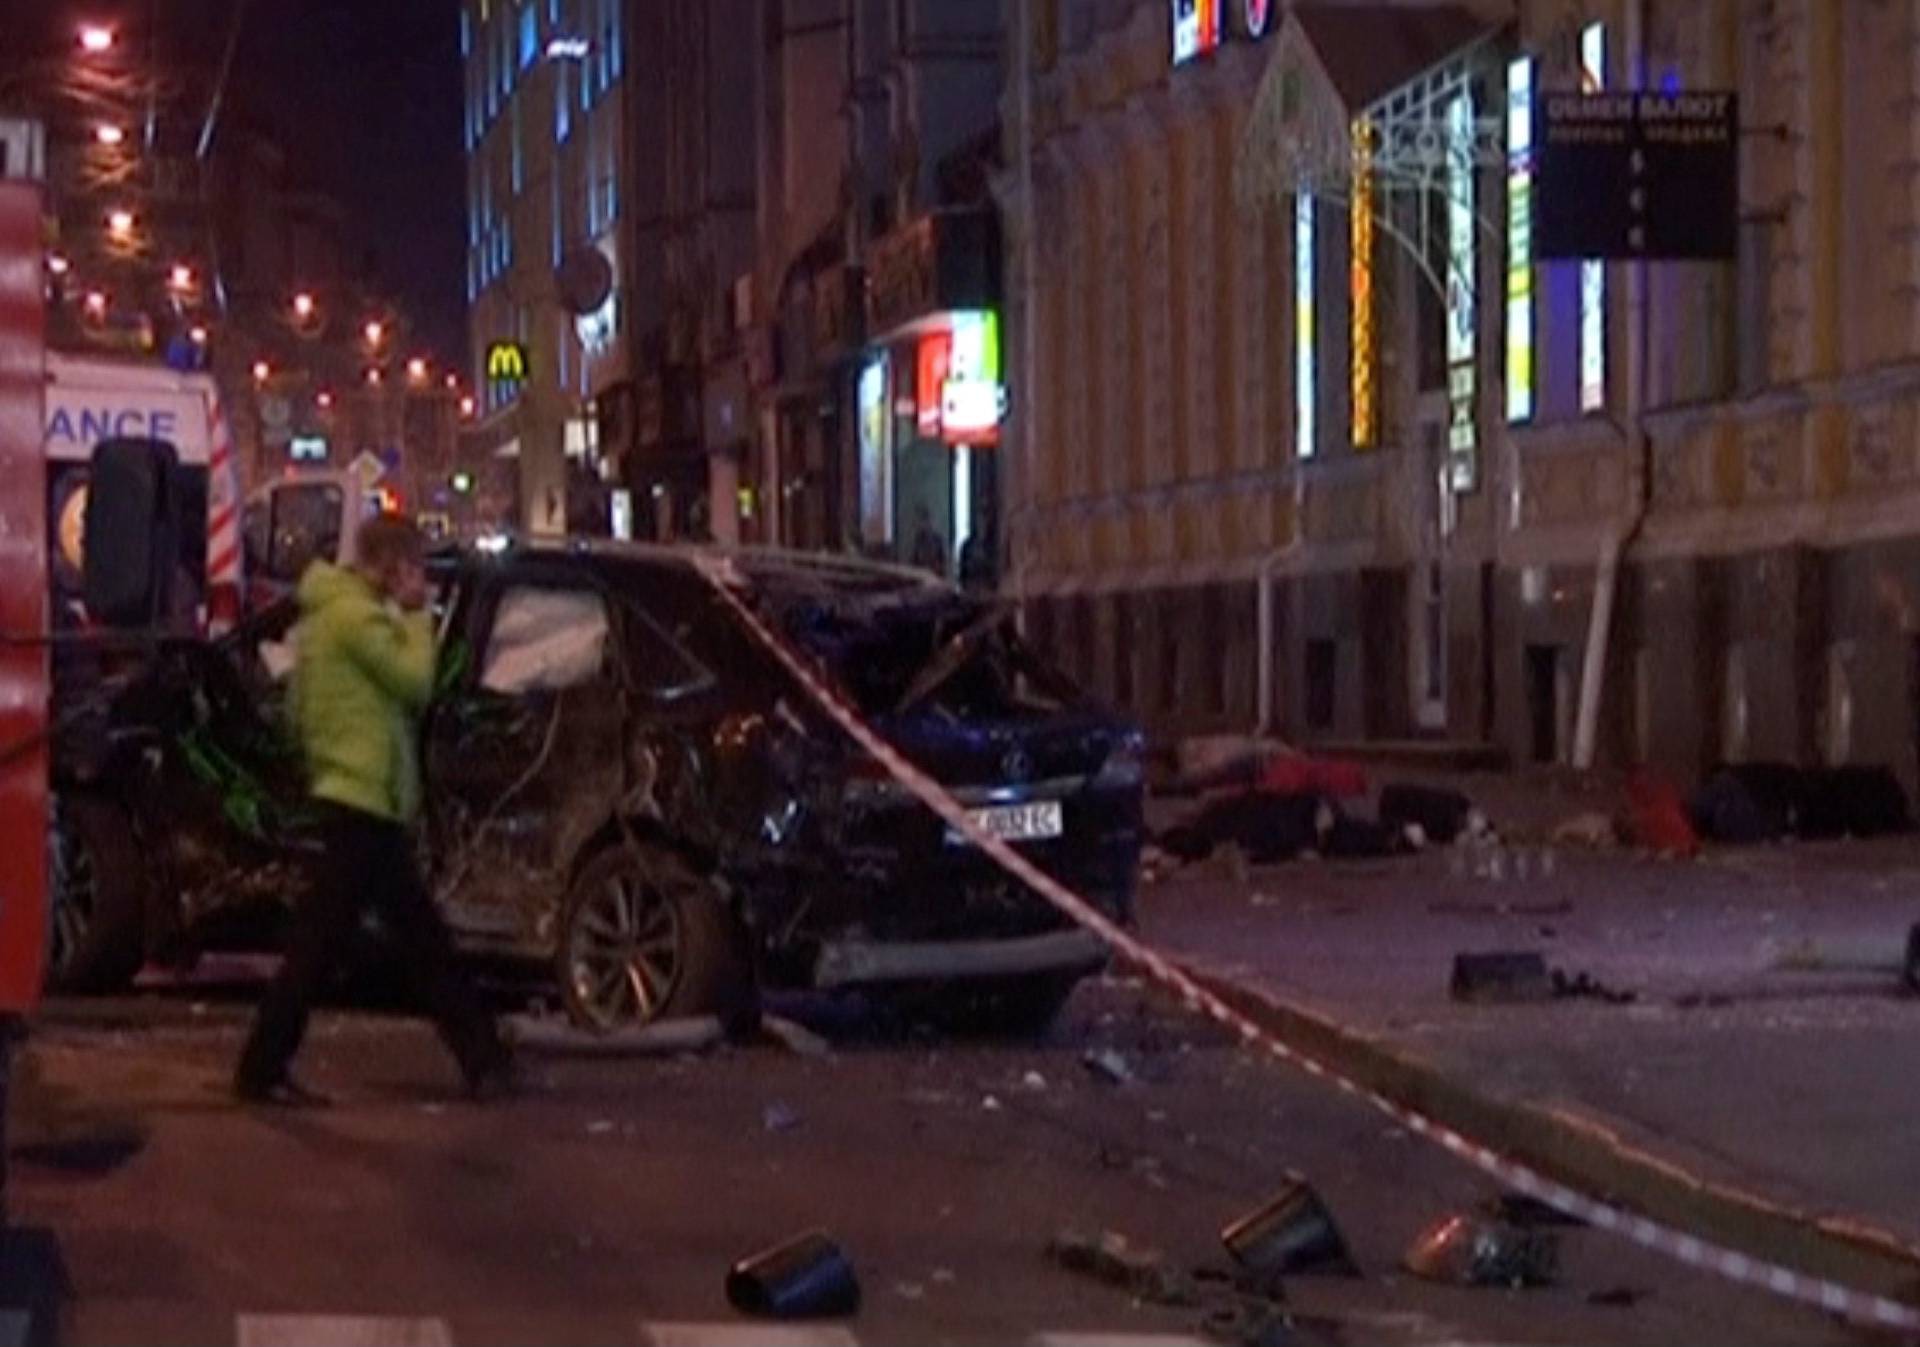 A still image taken from a video shot on October 18, 2017, shows a damaged sport utility vehicle at the accident scene after a car drove into pedestrians following a vehicle collision in central Kharkiv